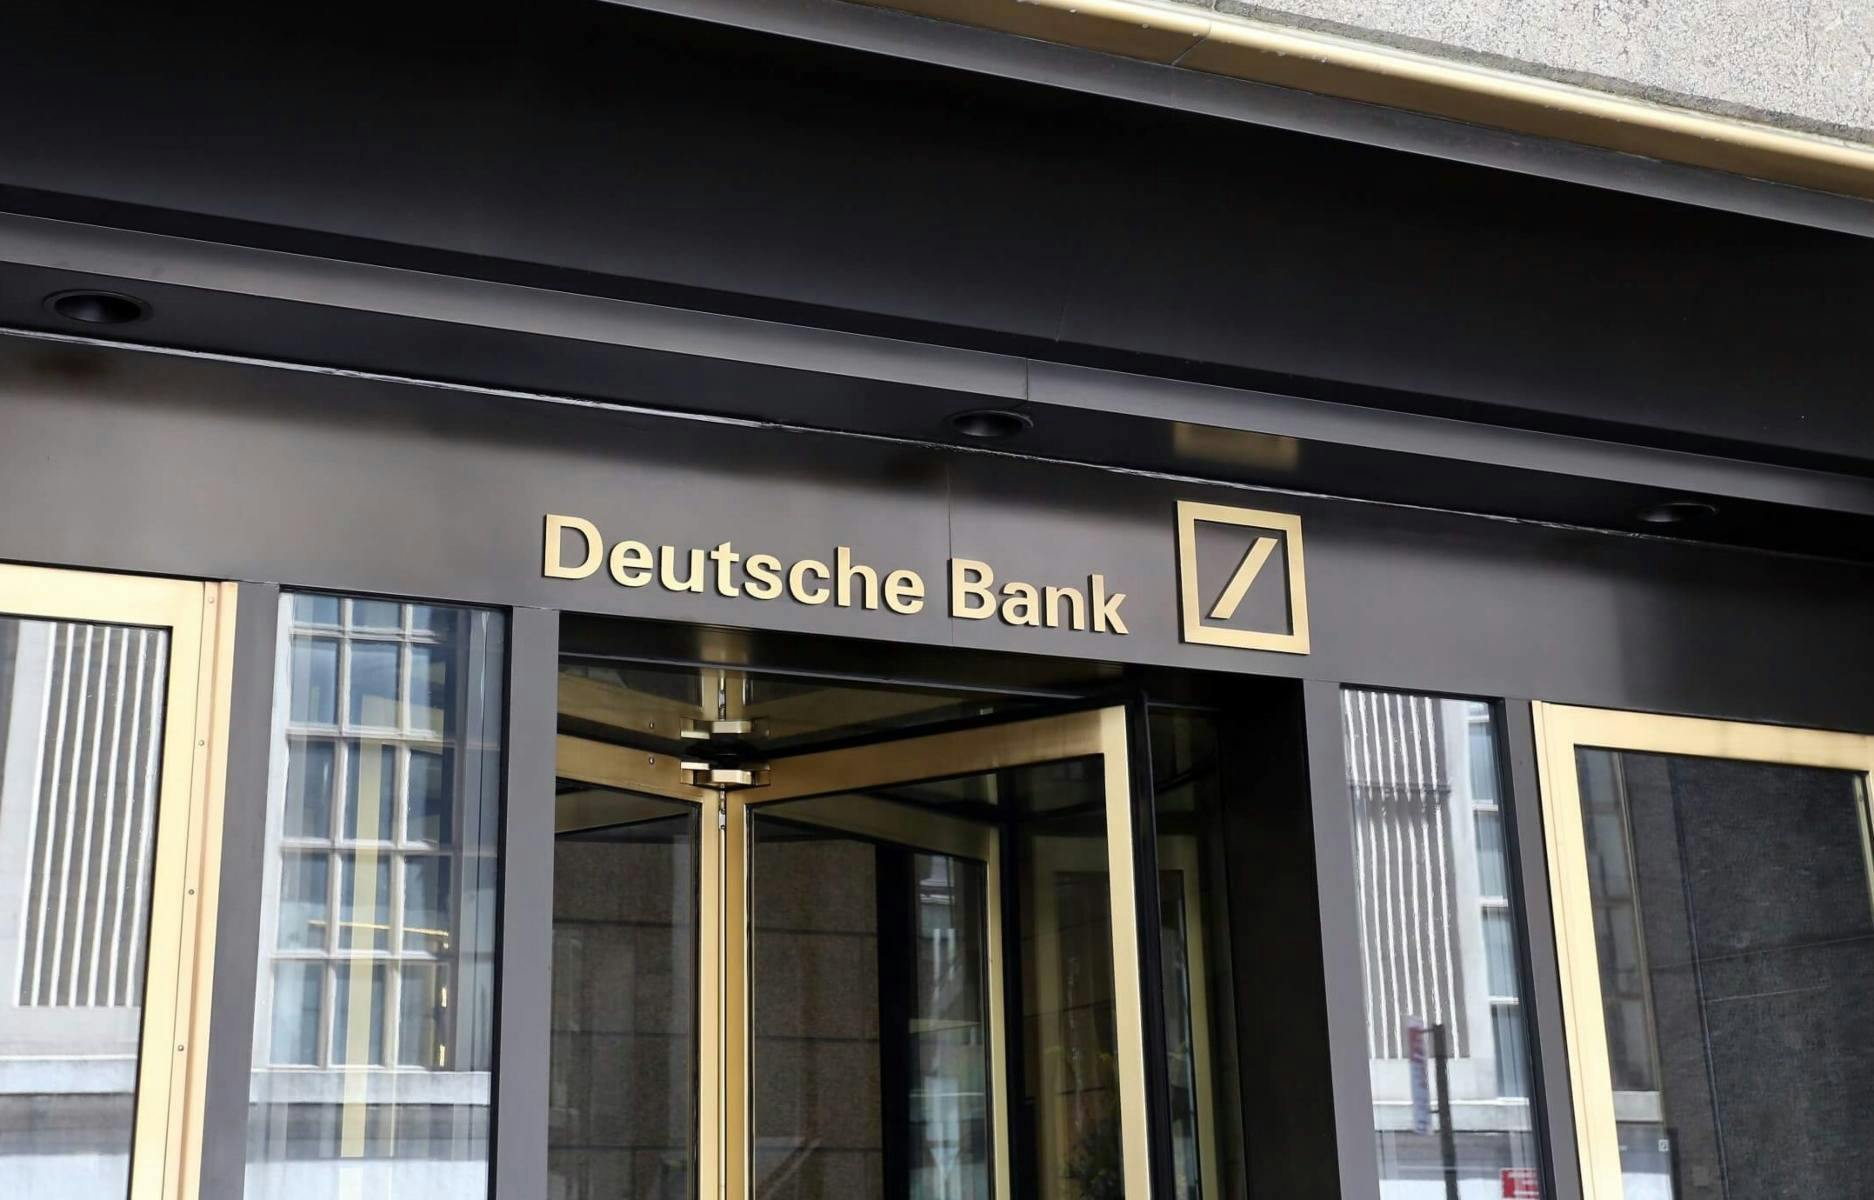 Deutsche Bank's DWS Group Teams Up with Galaxy Digital to Issue Euro Stablecoin